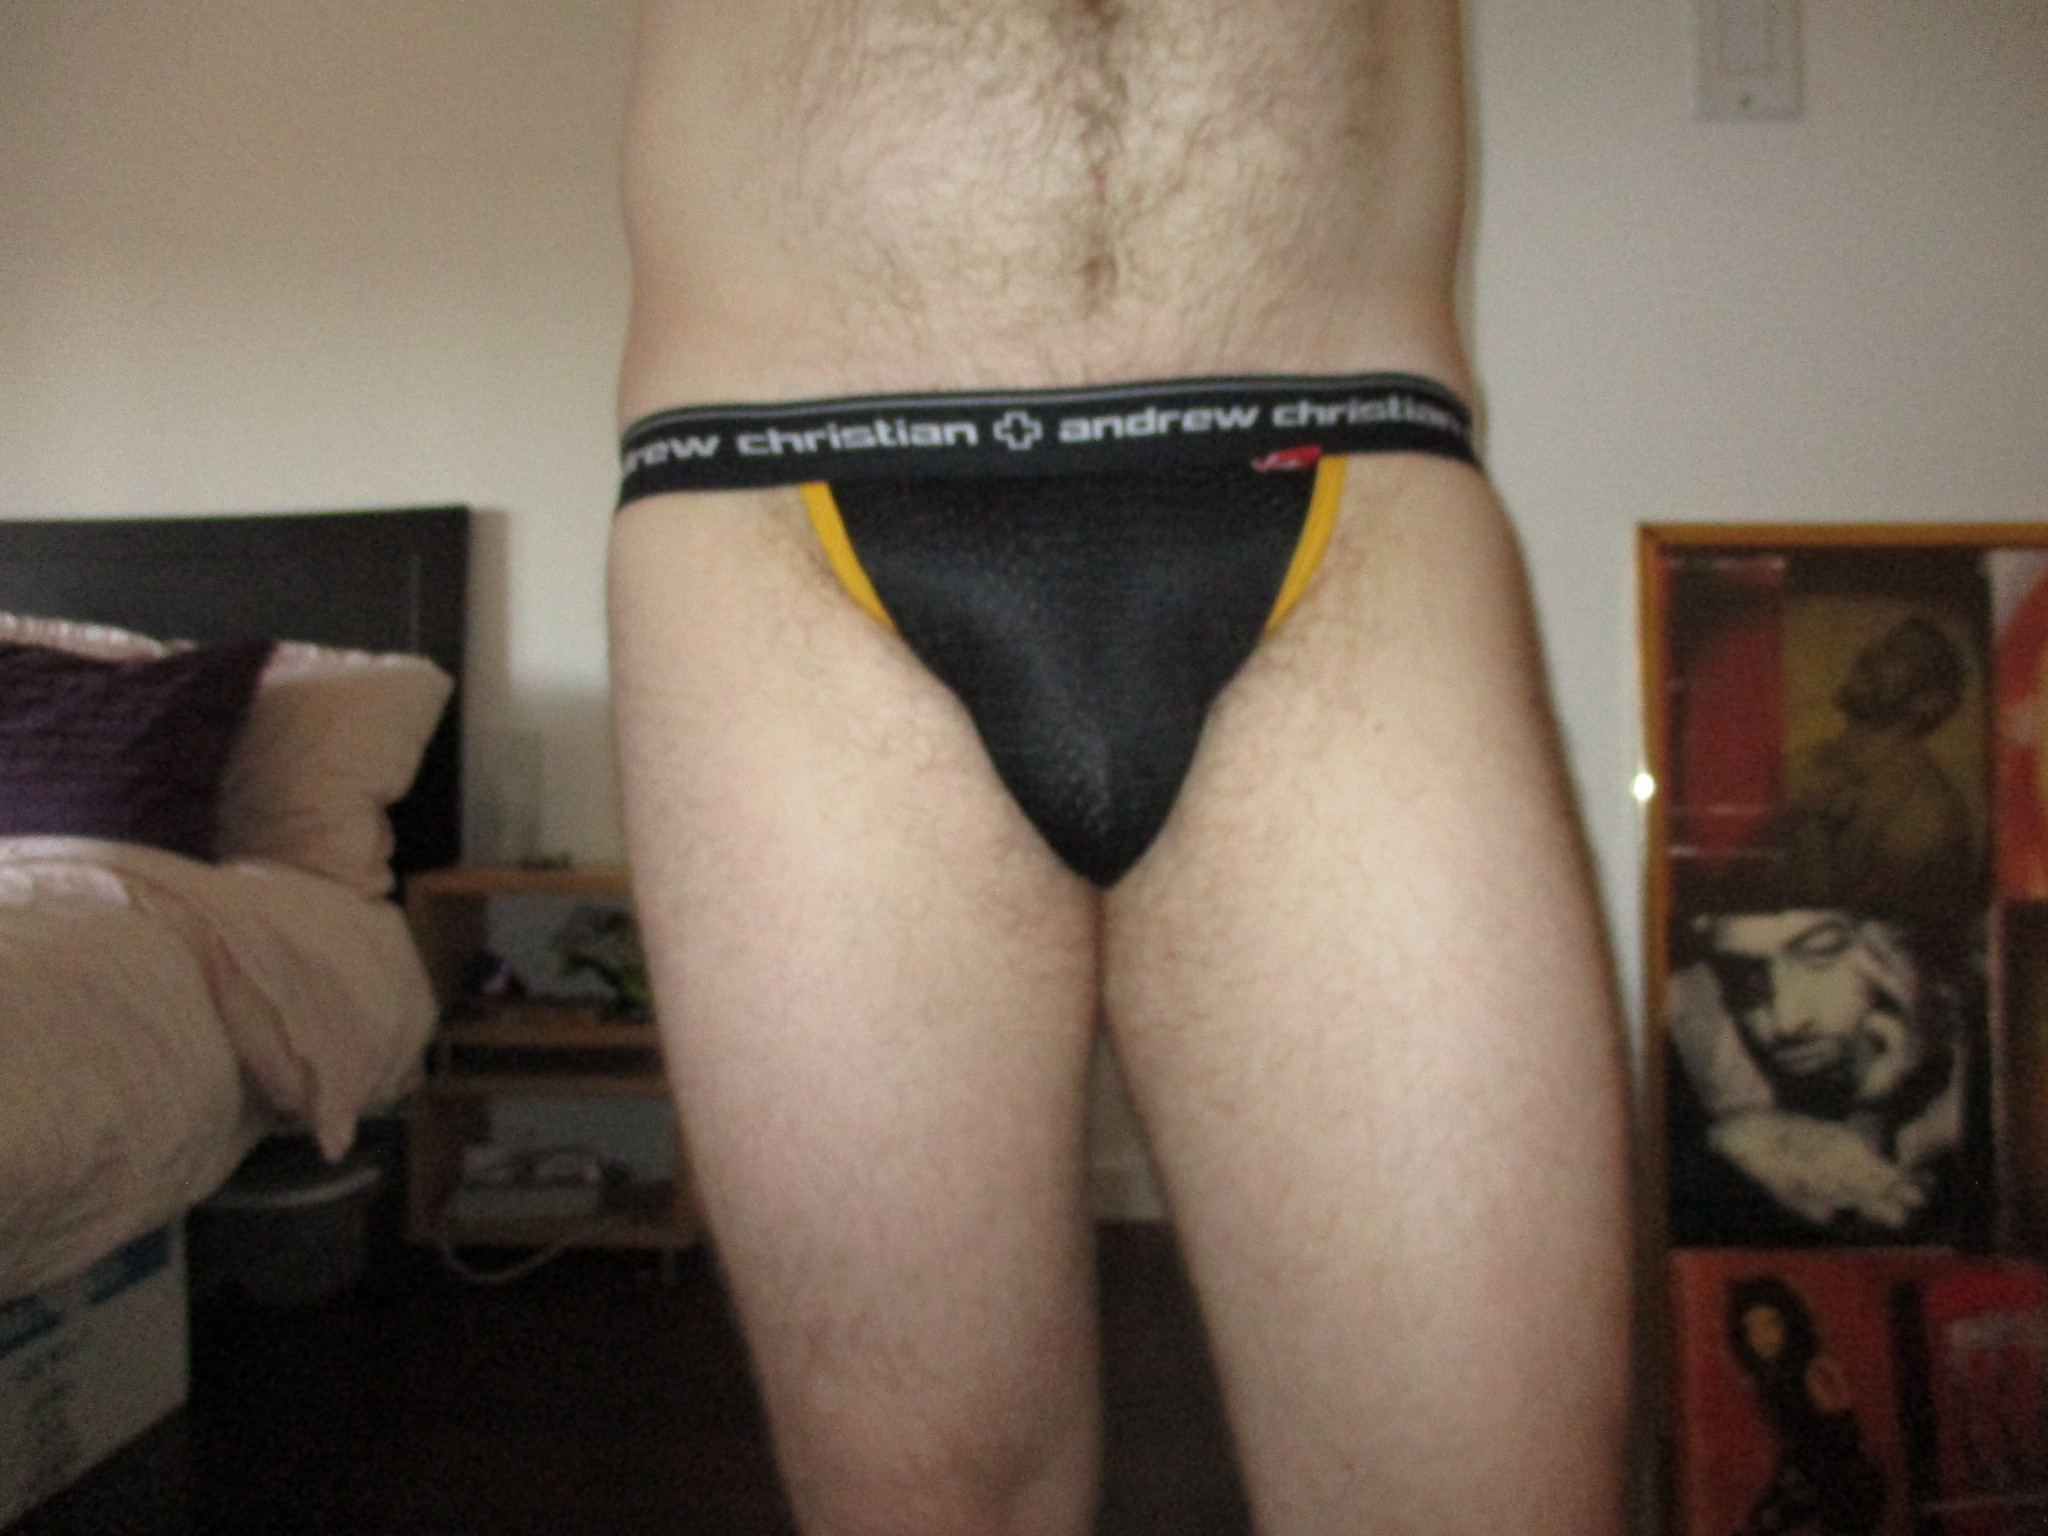 Jocktober is our current theme month…